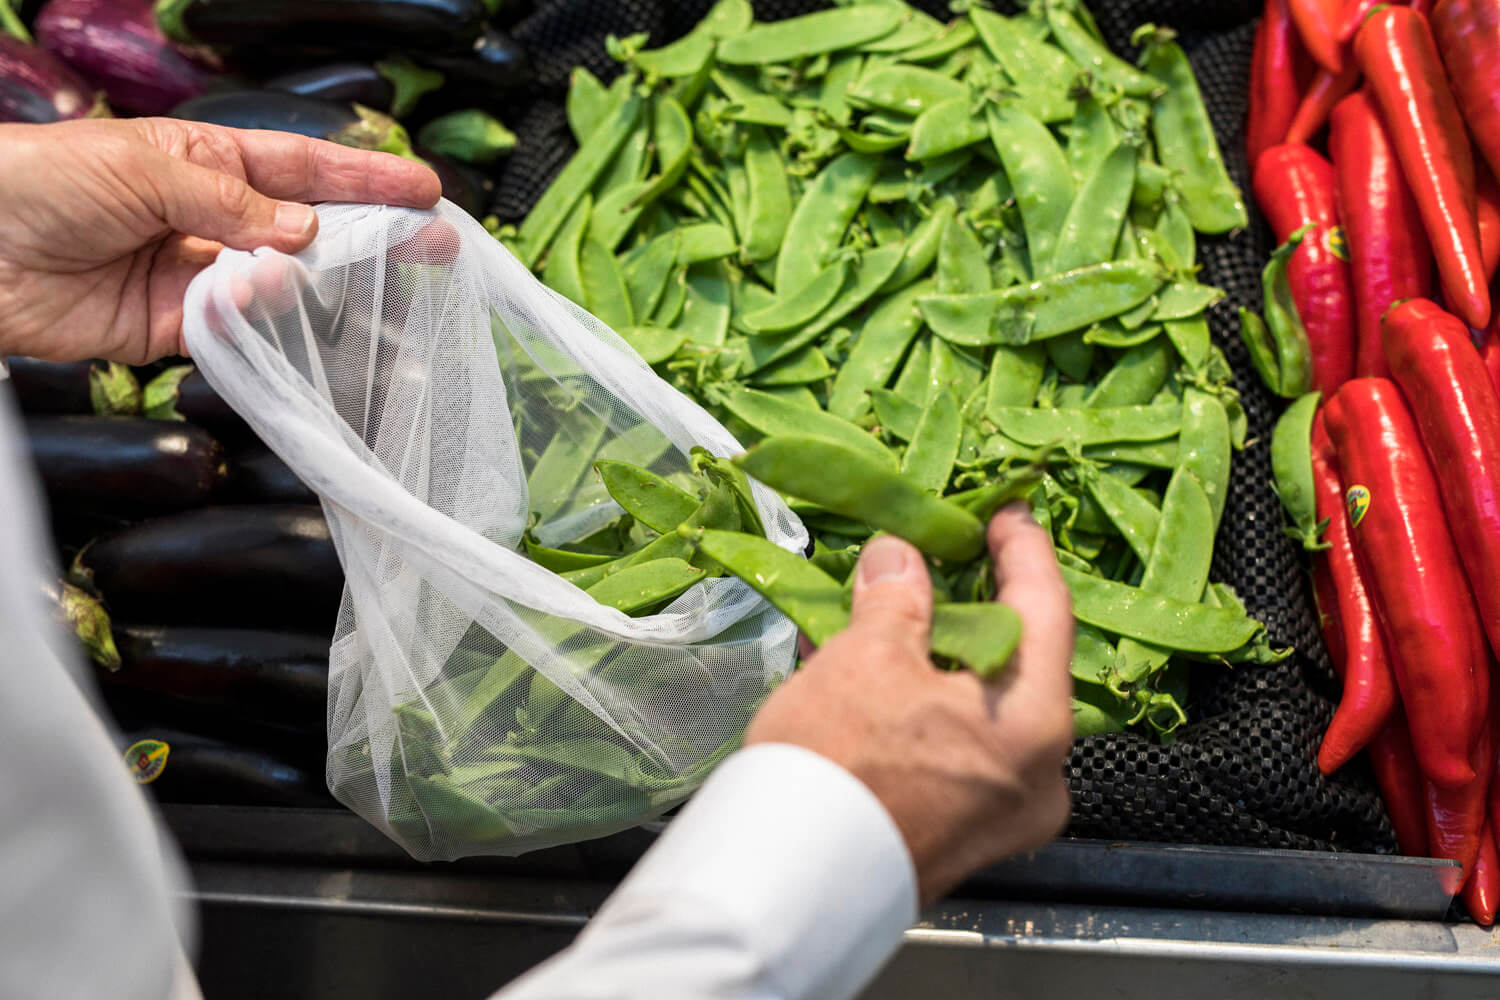 snowpeas being put in a plastic bag